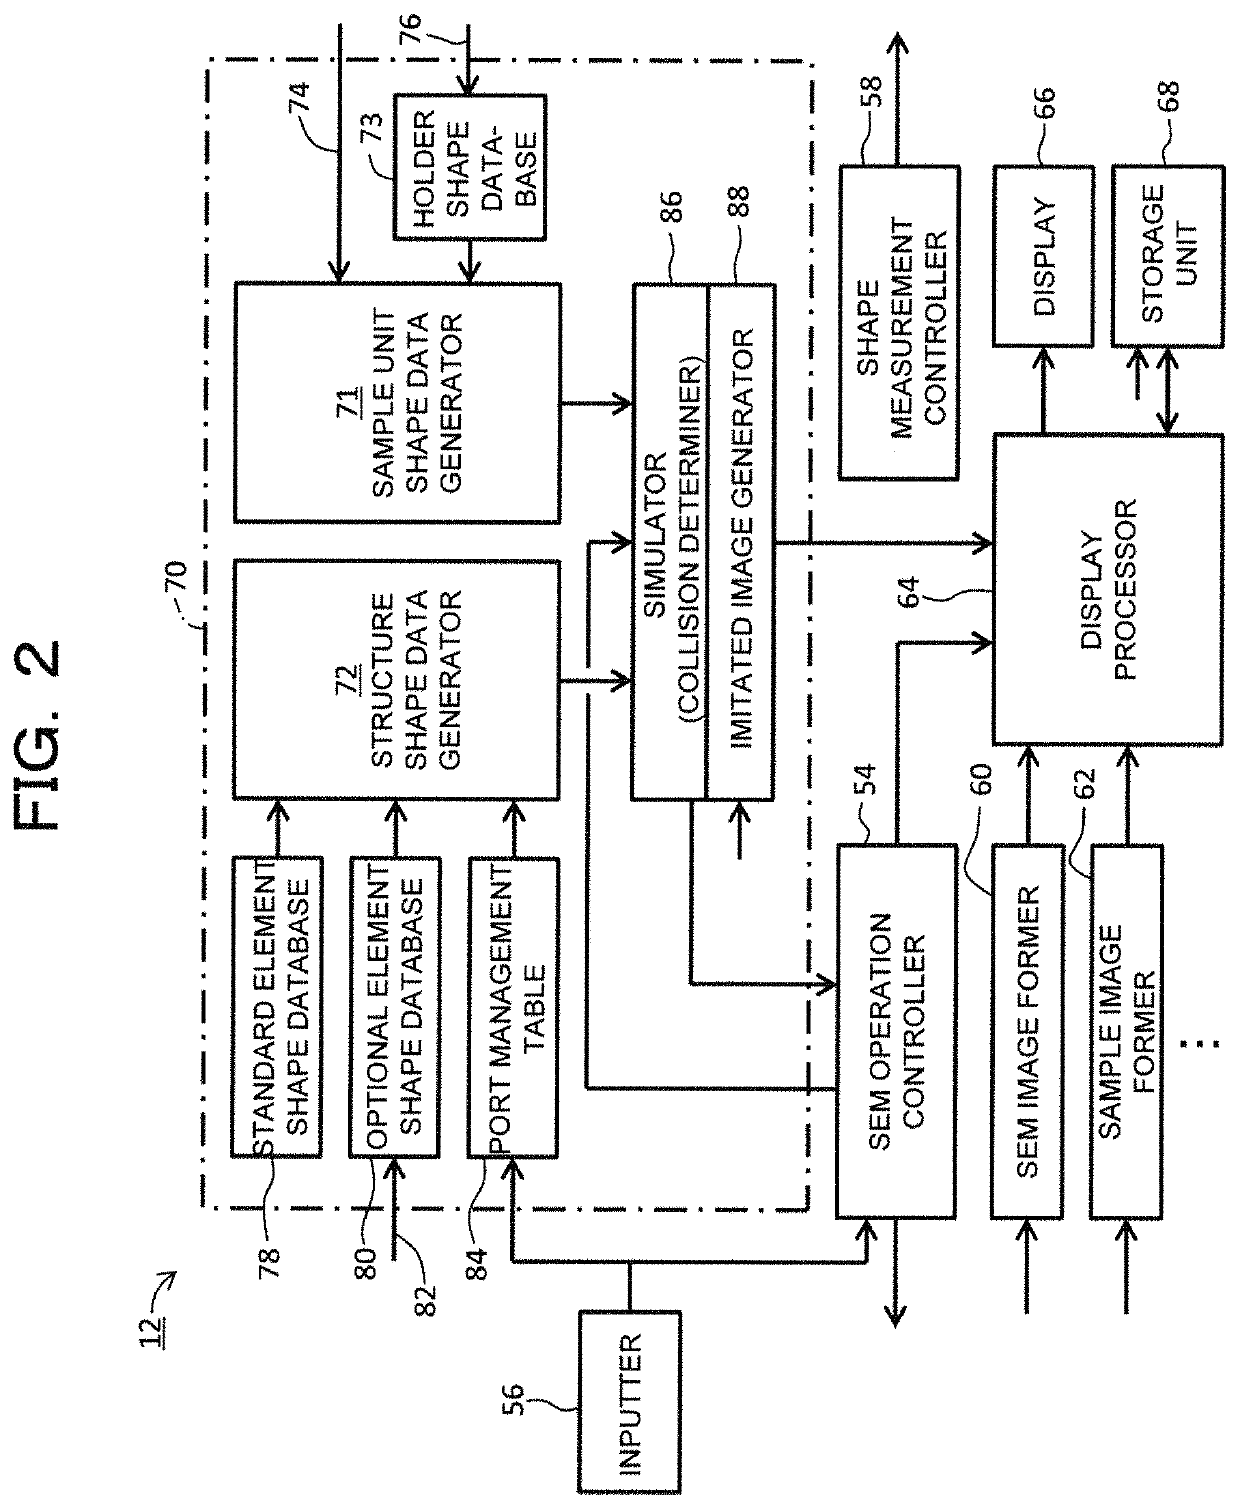 Charged particle beam system and method of measuring sample using scanning electron microscope